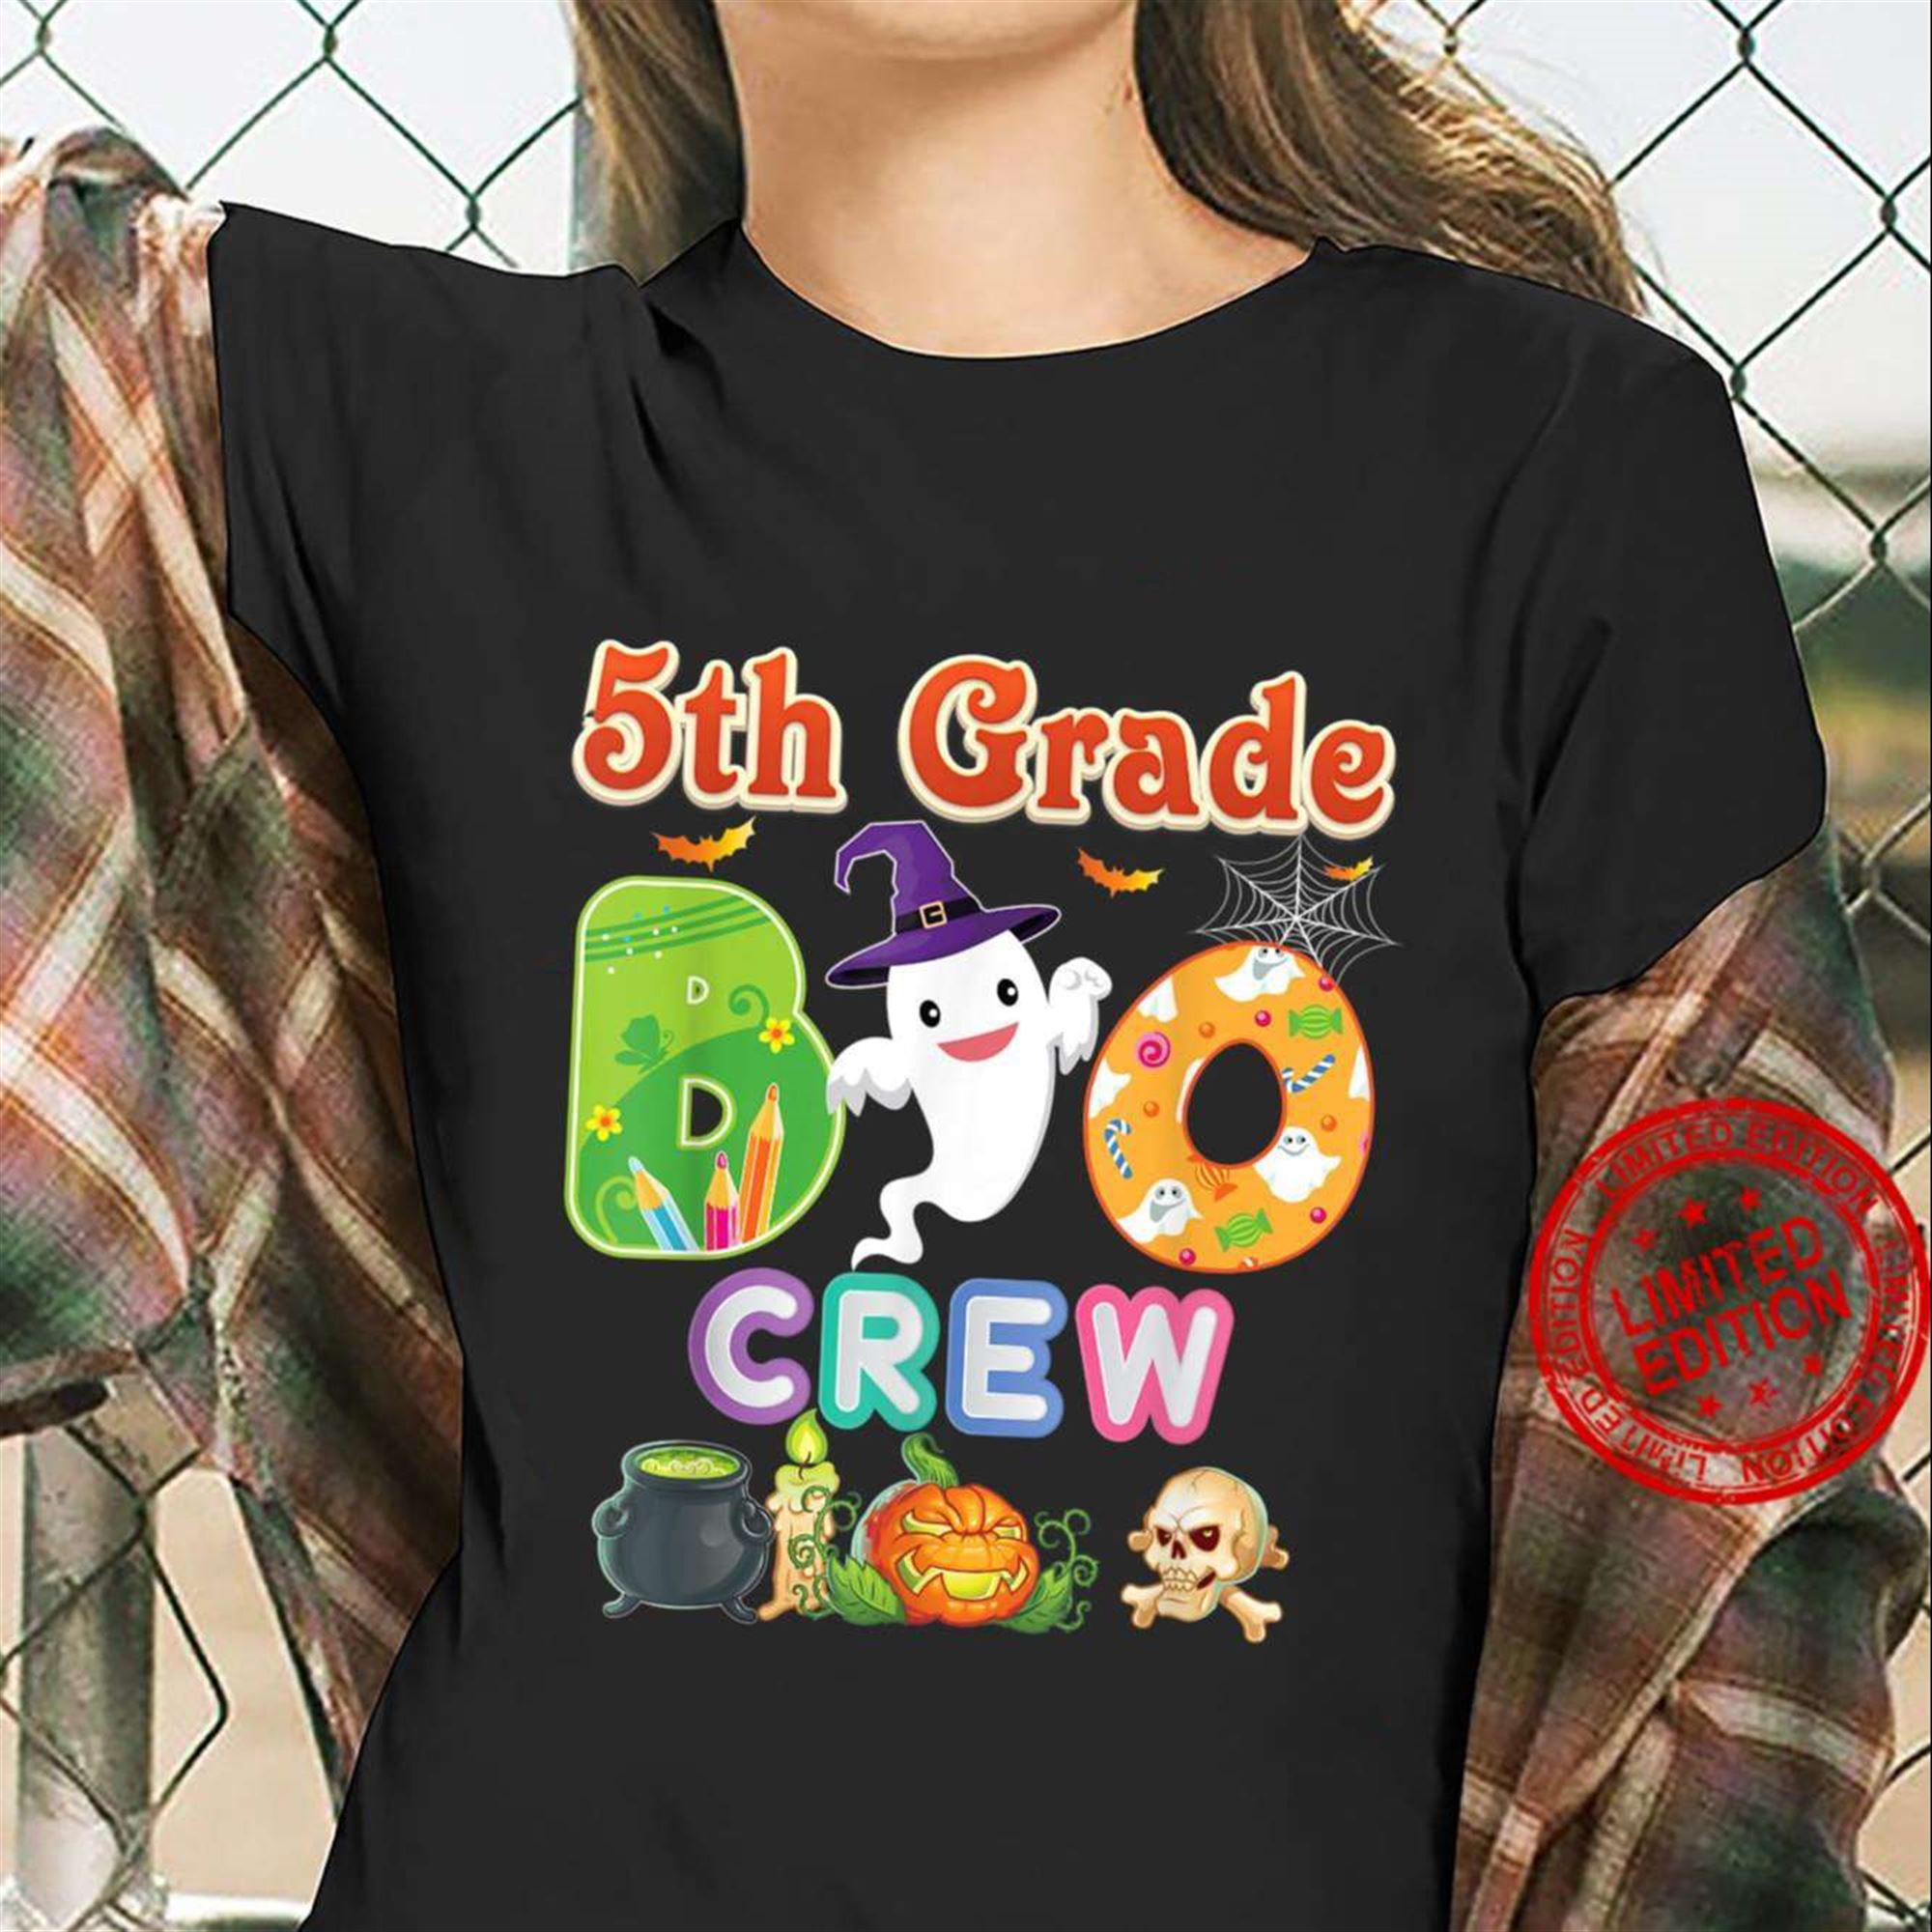 5th Grade Boo Crew Squad Team Ghost Fifth Teacher Halloween T-shirt Plus Size Up To 5xl